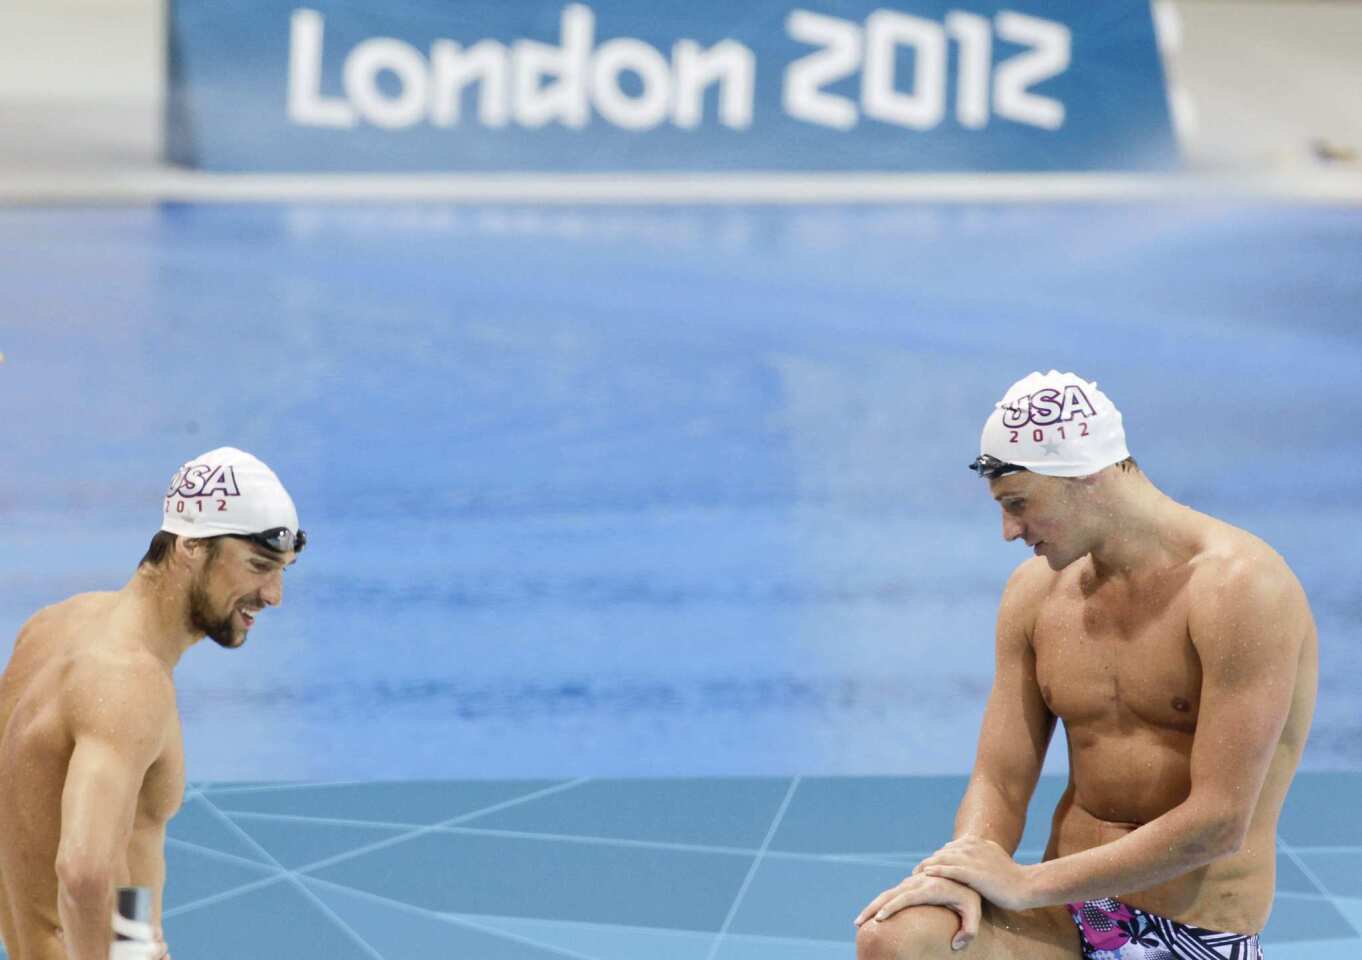 United States swimmers Michael Phelps, left, and Ryan Lochte are seen during a training session at the Olympic Aquatics Center in London.